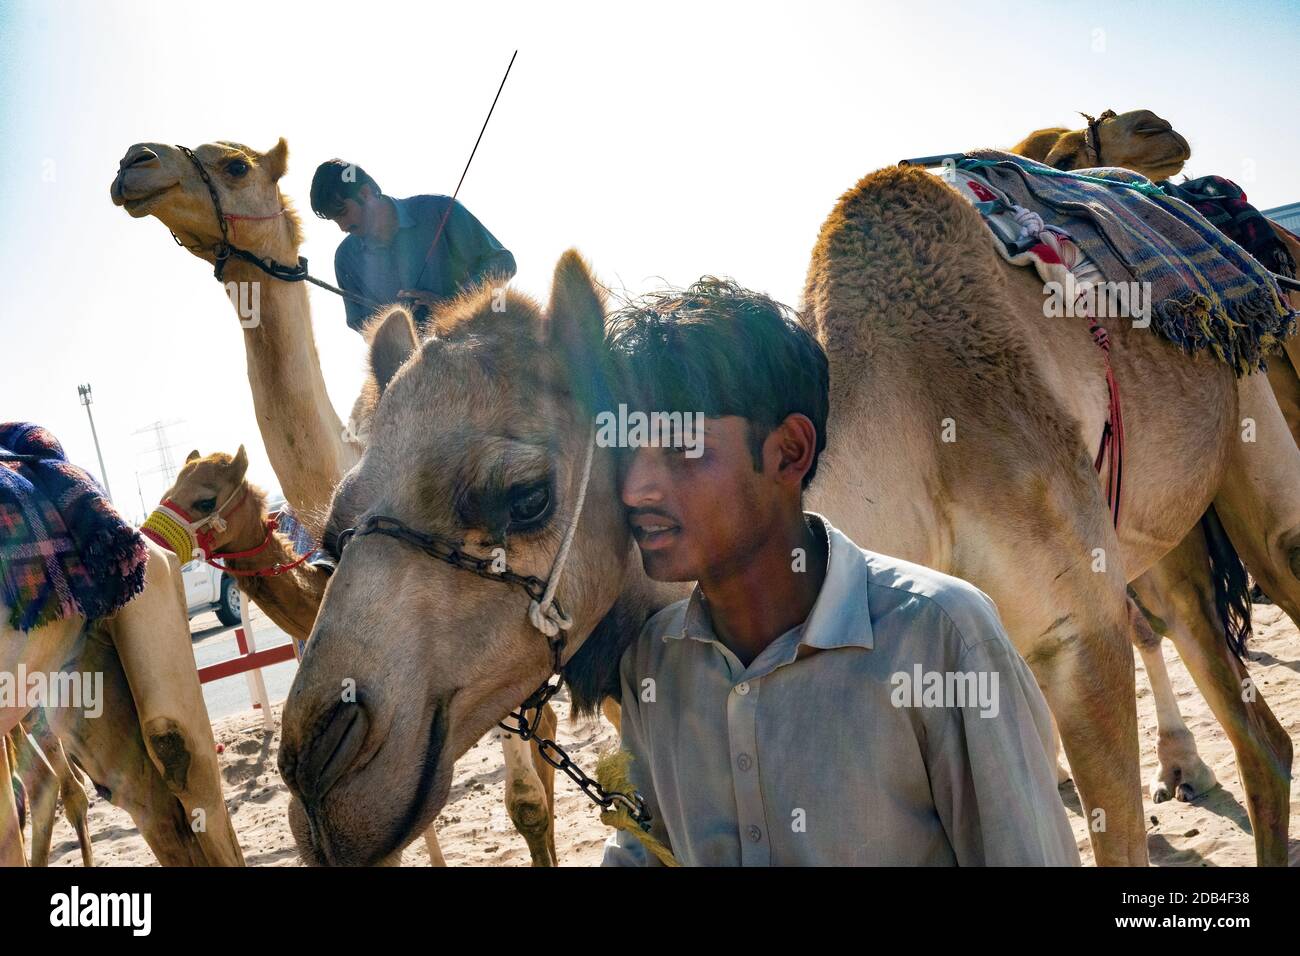 United Arab Emirates / Al Dhaid / Camel trainers with their camels, near the camel racing track. Stock Photo